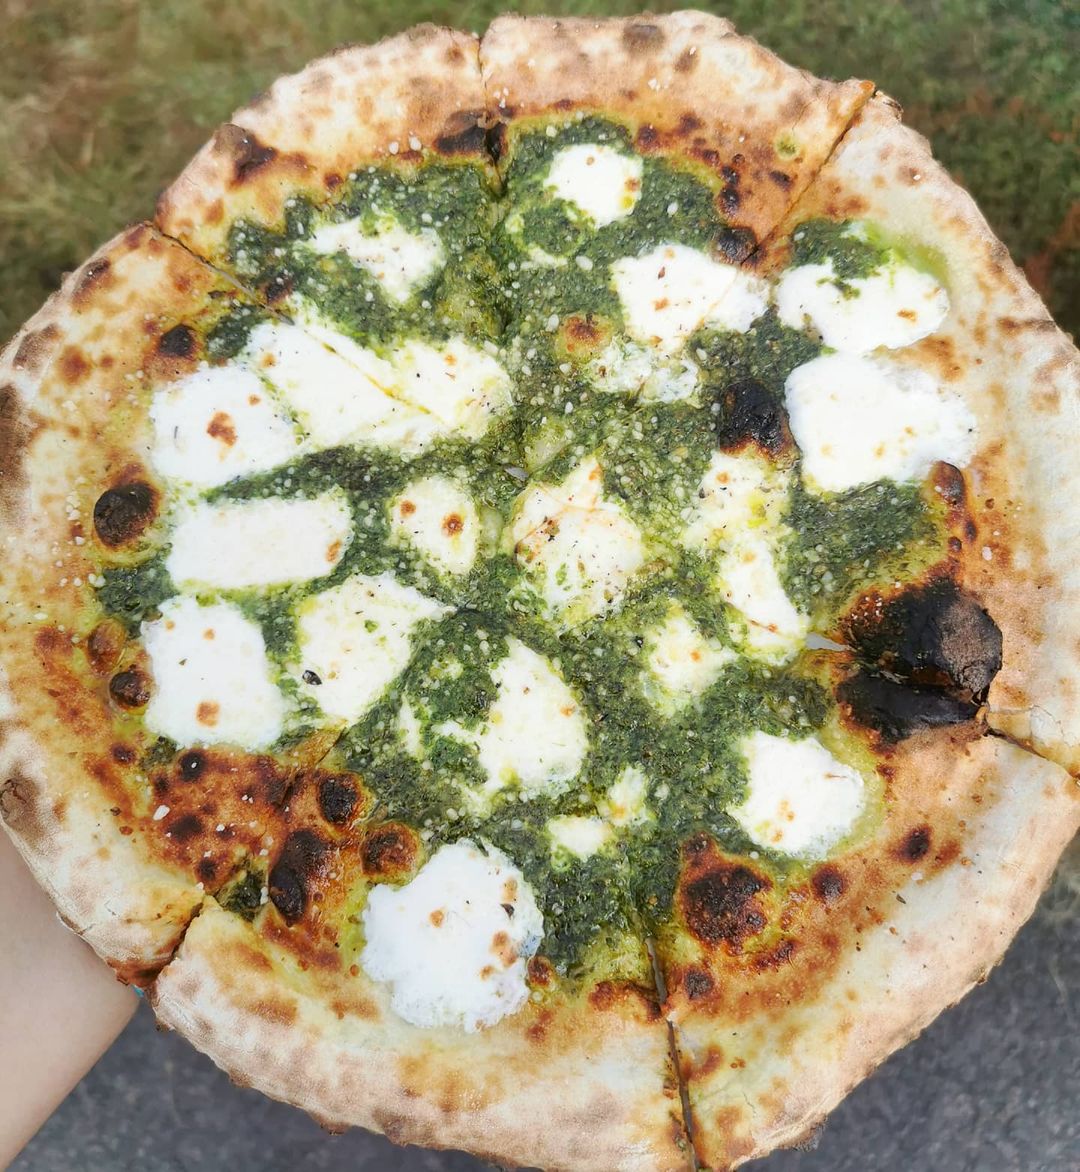 Pesto wood fired pizza from Pie Oh My truck.